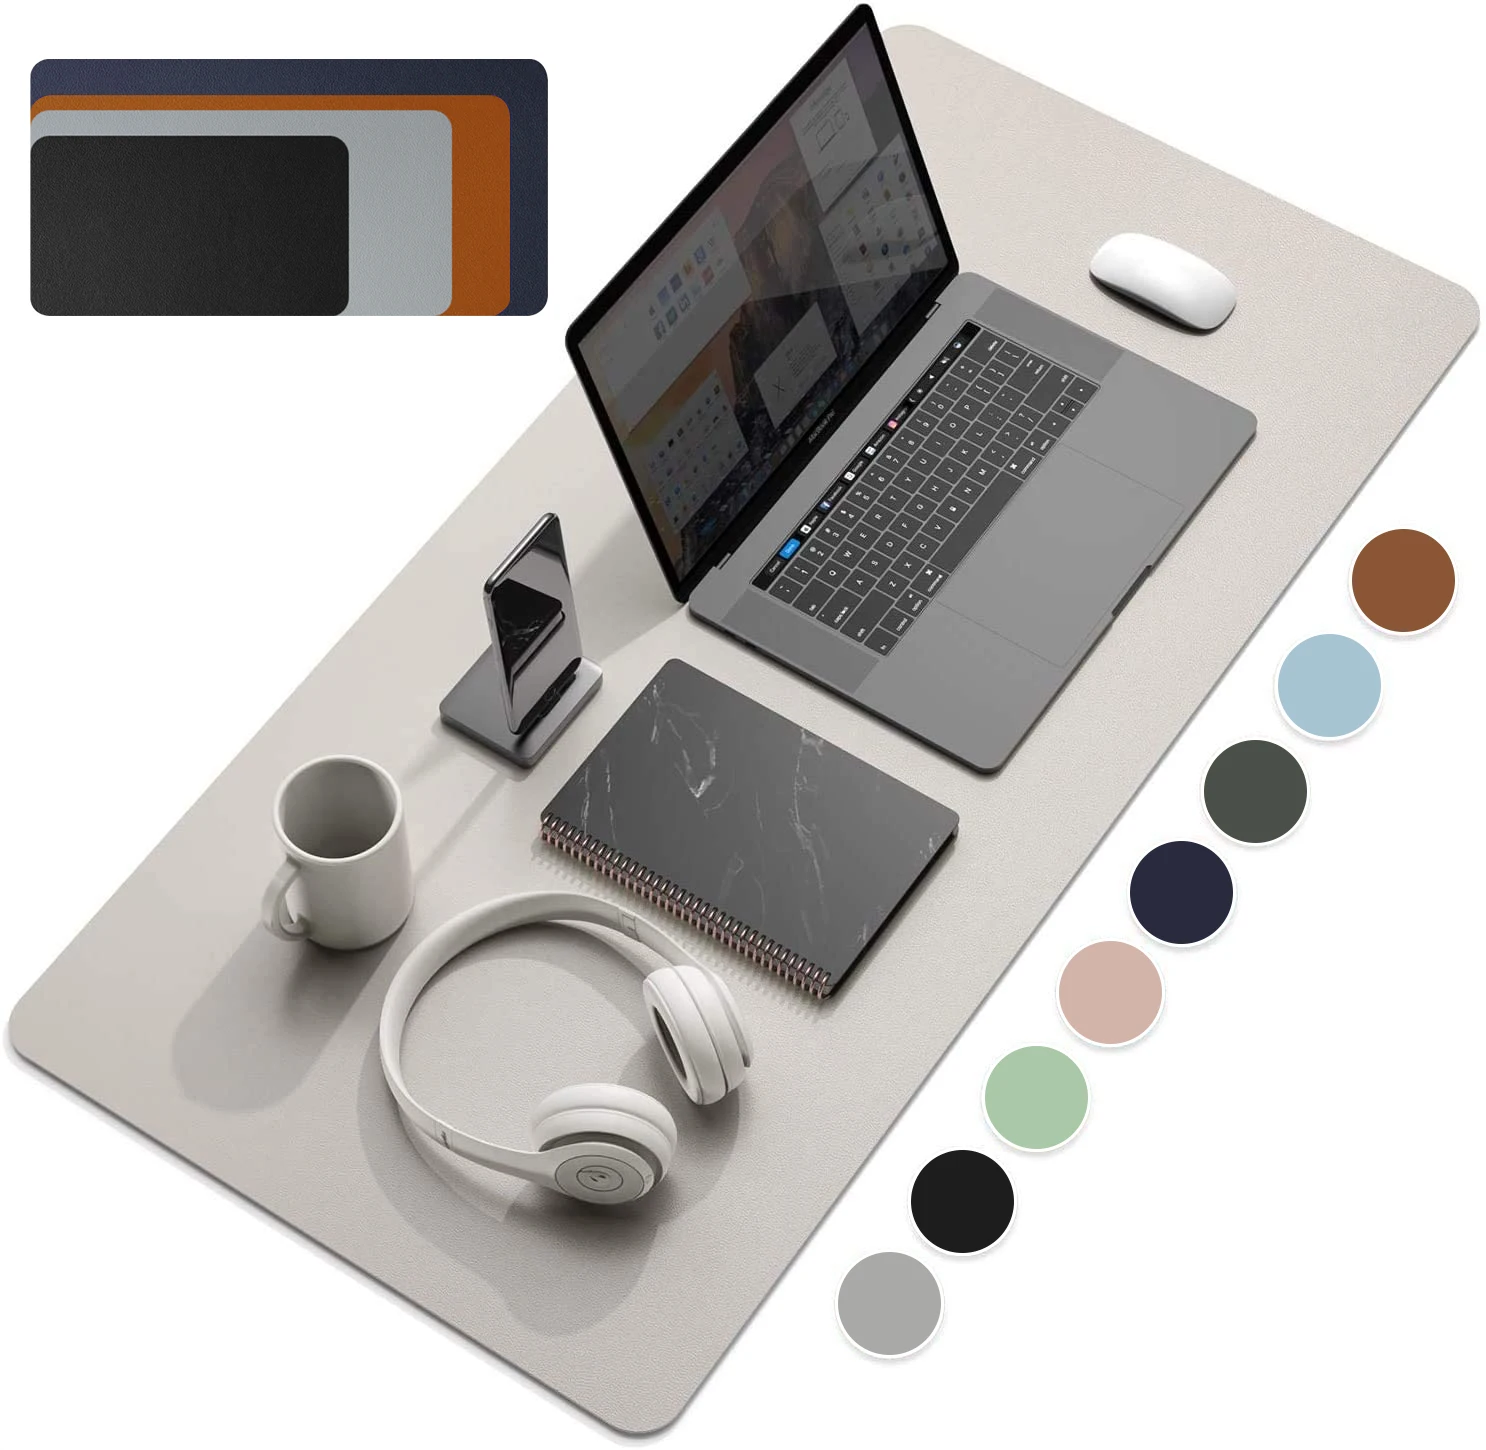 Large Size Office Desk Protector Mat PU Leather Waterproof Mouse Pad Desktop Keyboard Desk Pad Gaming Mousepad PC Accessories large size office desk protector mat pu leather waterproof mouse pad desktop keyboard desk pad gaming mousepad pc accessories